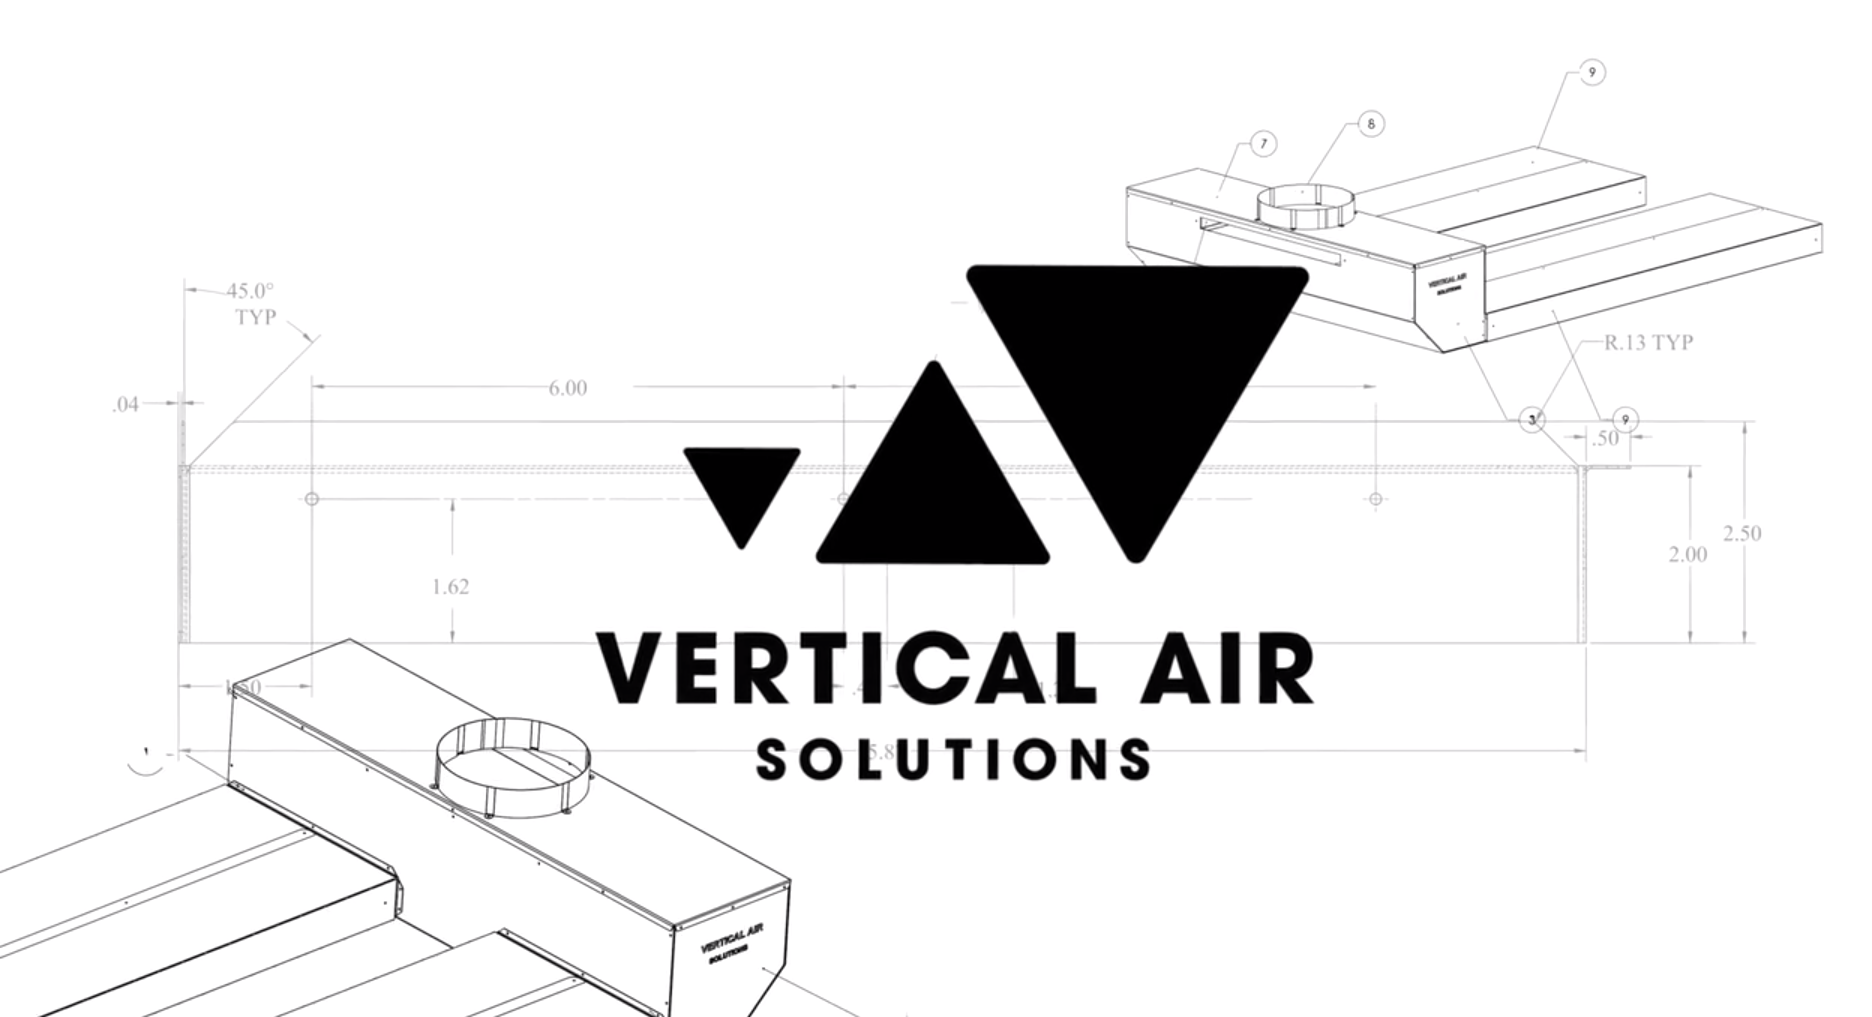 Vertical Air Solutions Patent